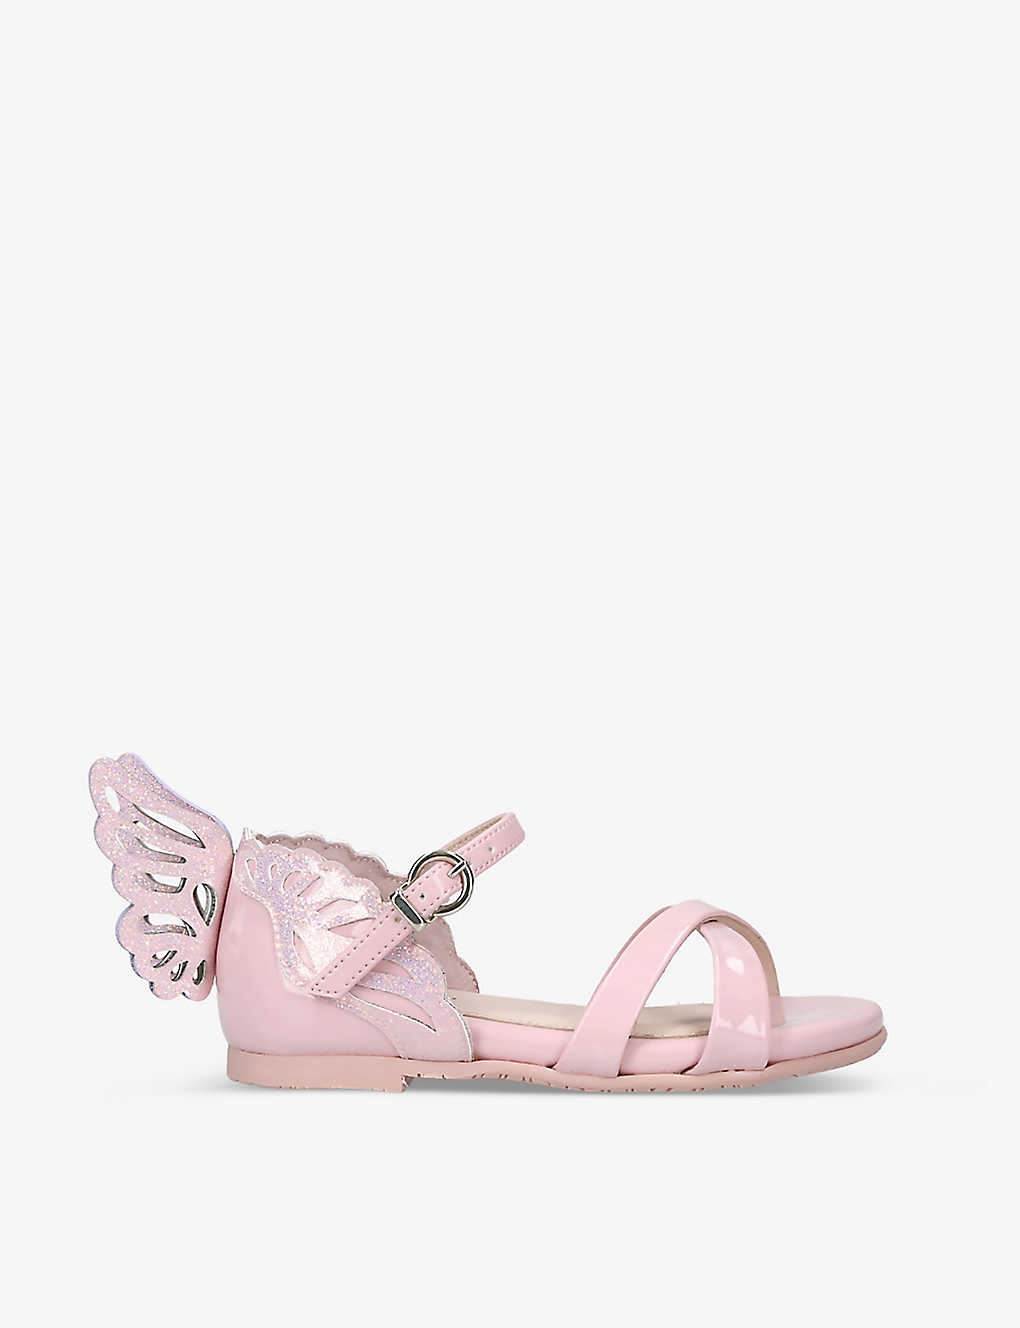 Sophia Webster Kids' Heavenly Wing-embellished Patent-leather Sandals 1-7 Years In Pale Pink